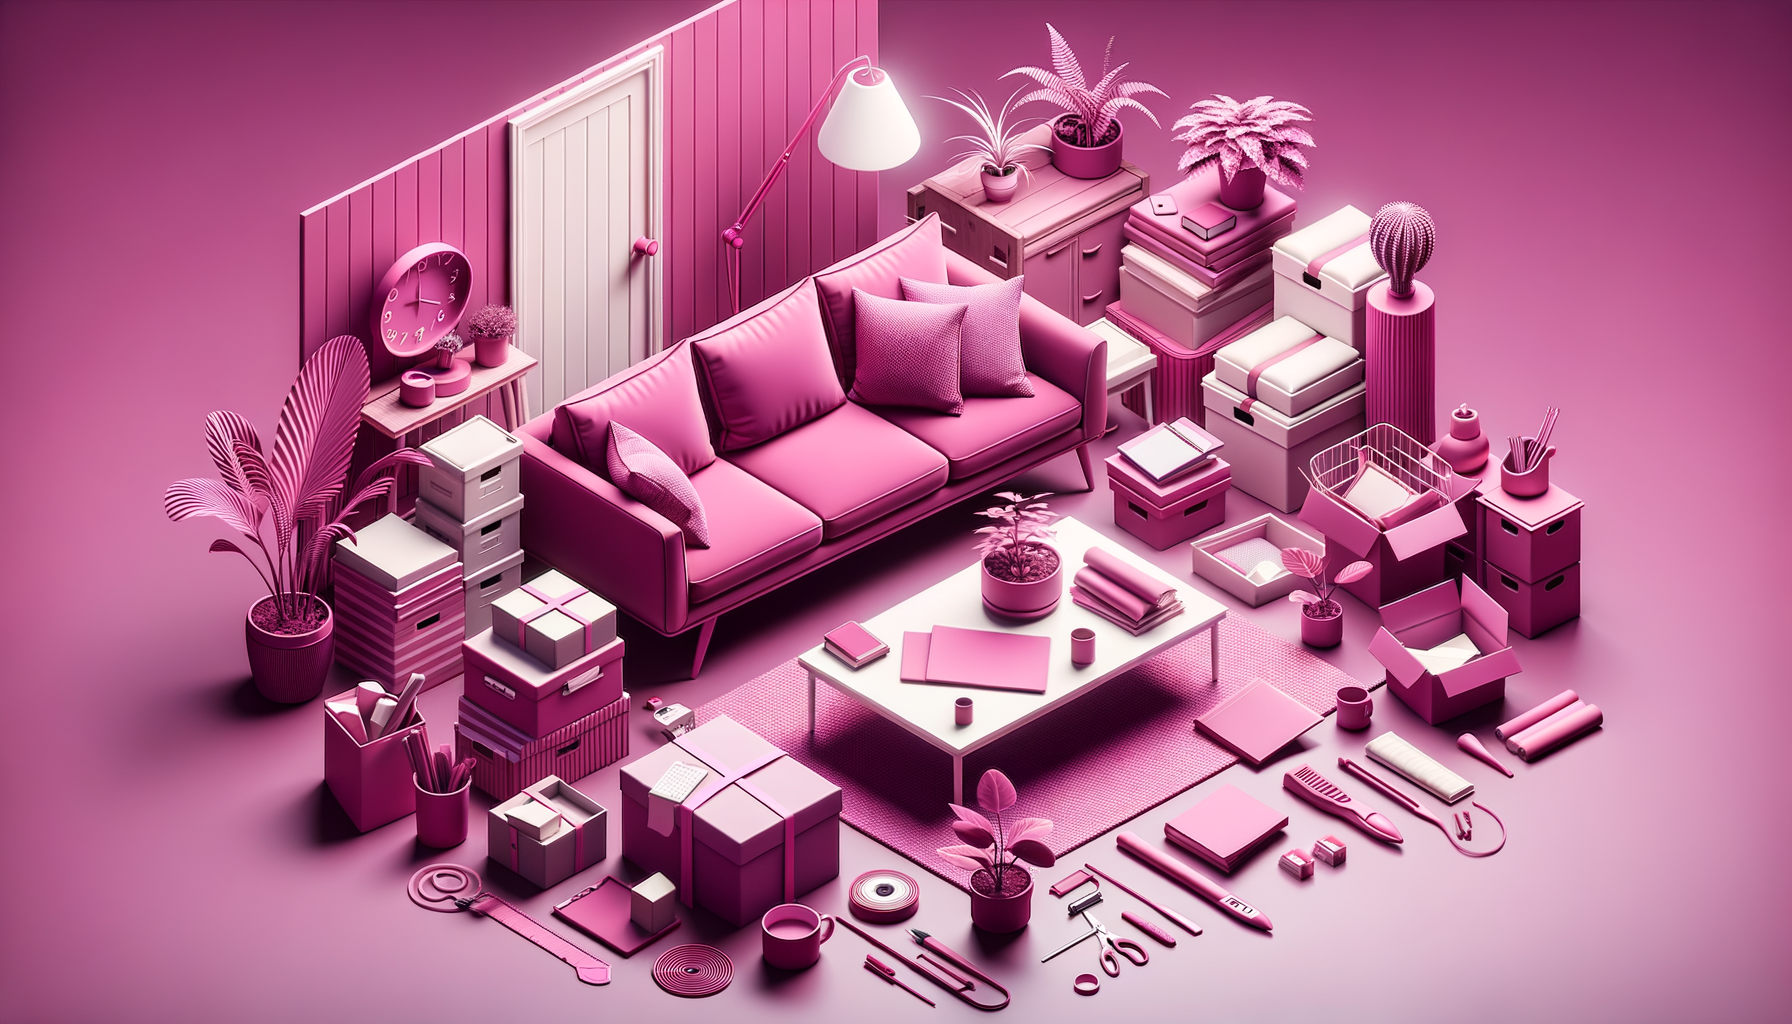 Cartoon-like fuschia colored image illustrating the concept of decluttering before moving.